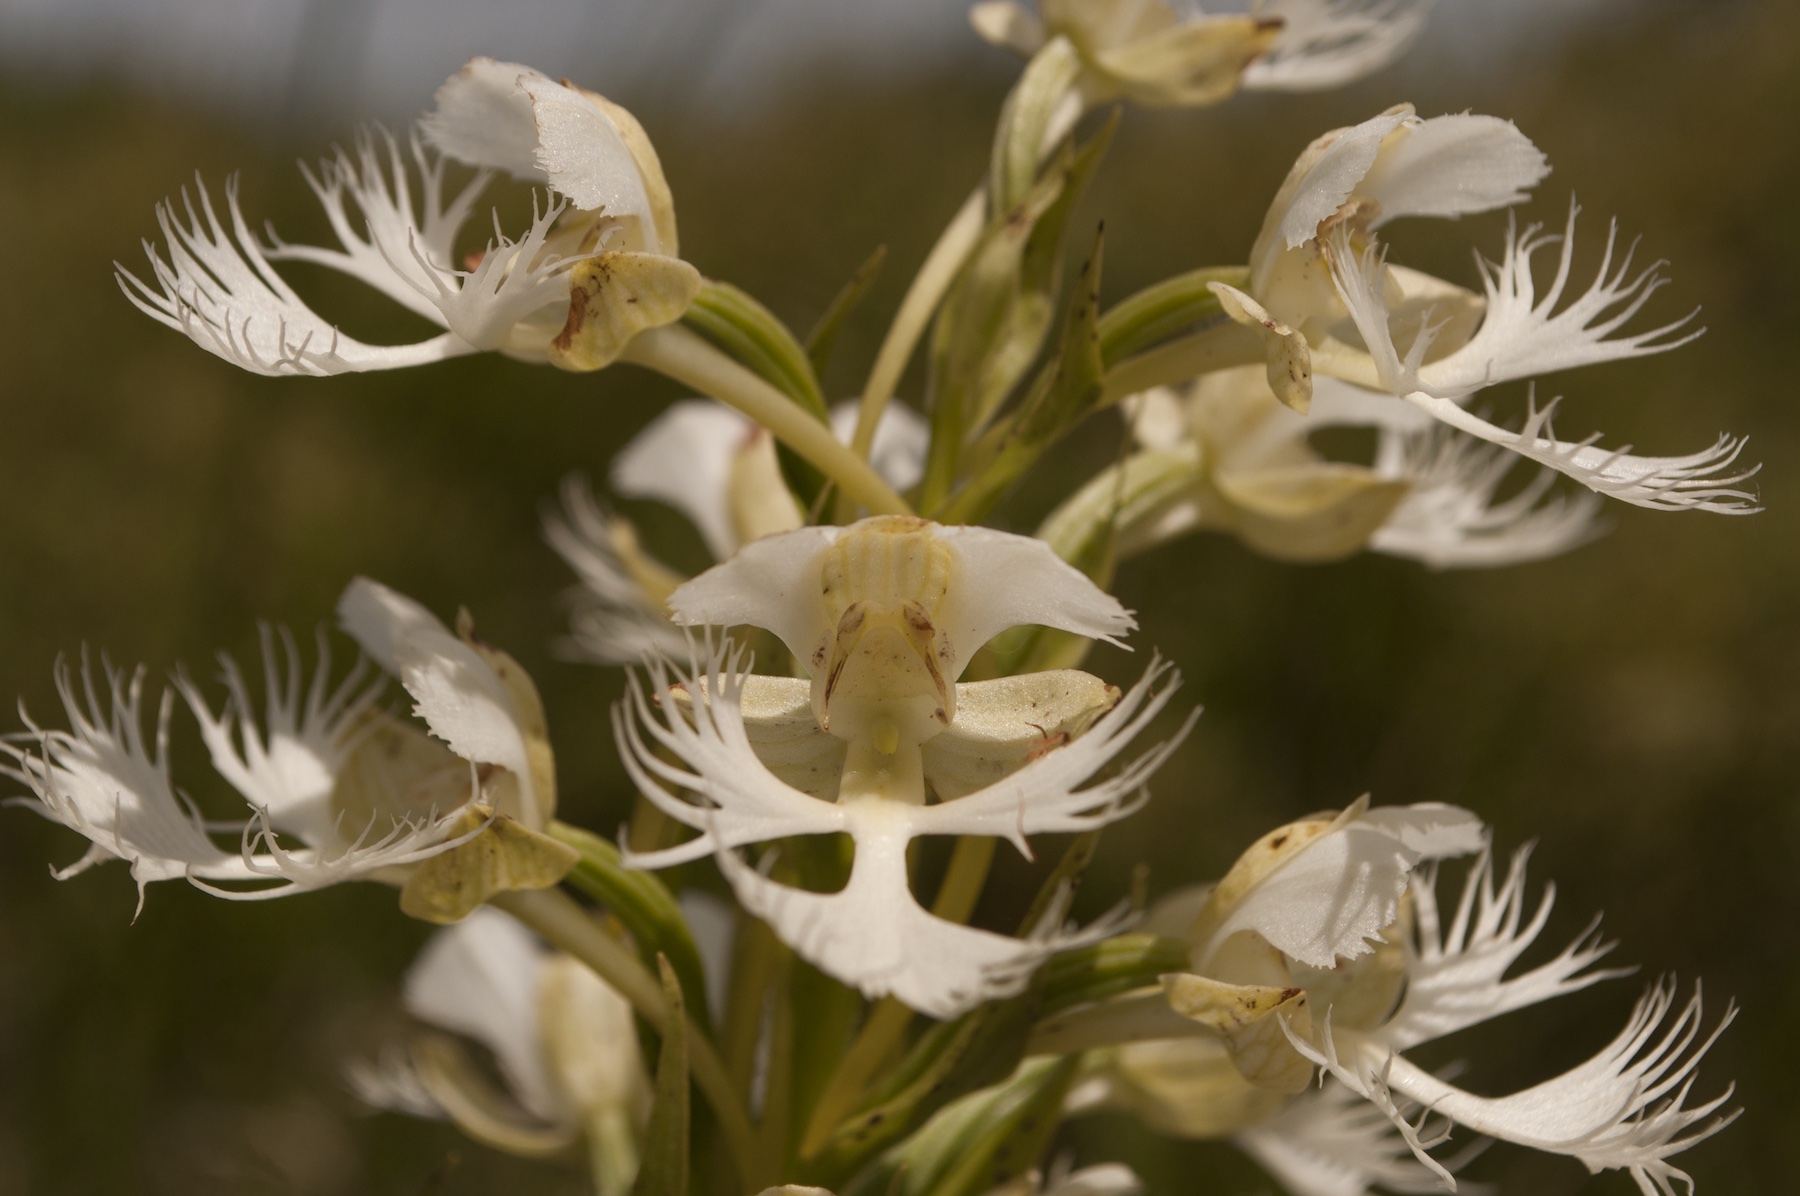 An orchid plant with multiple flowers. It's white and the petals of the flowers branch out into thin vein-like shapes.